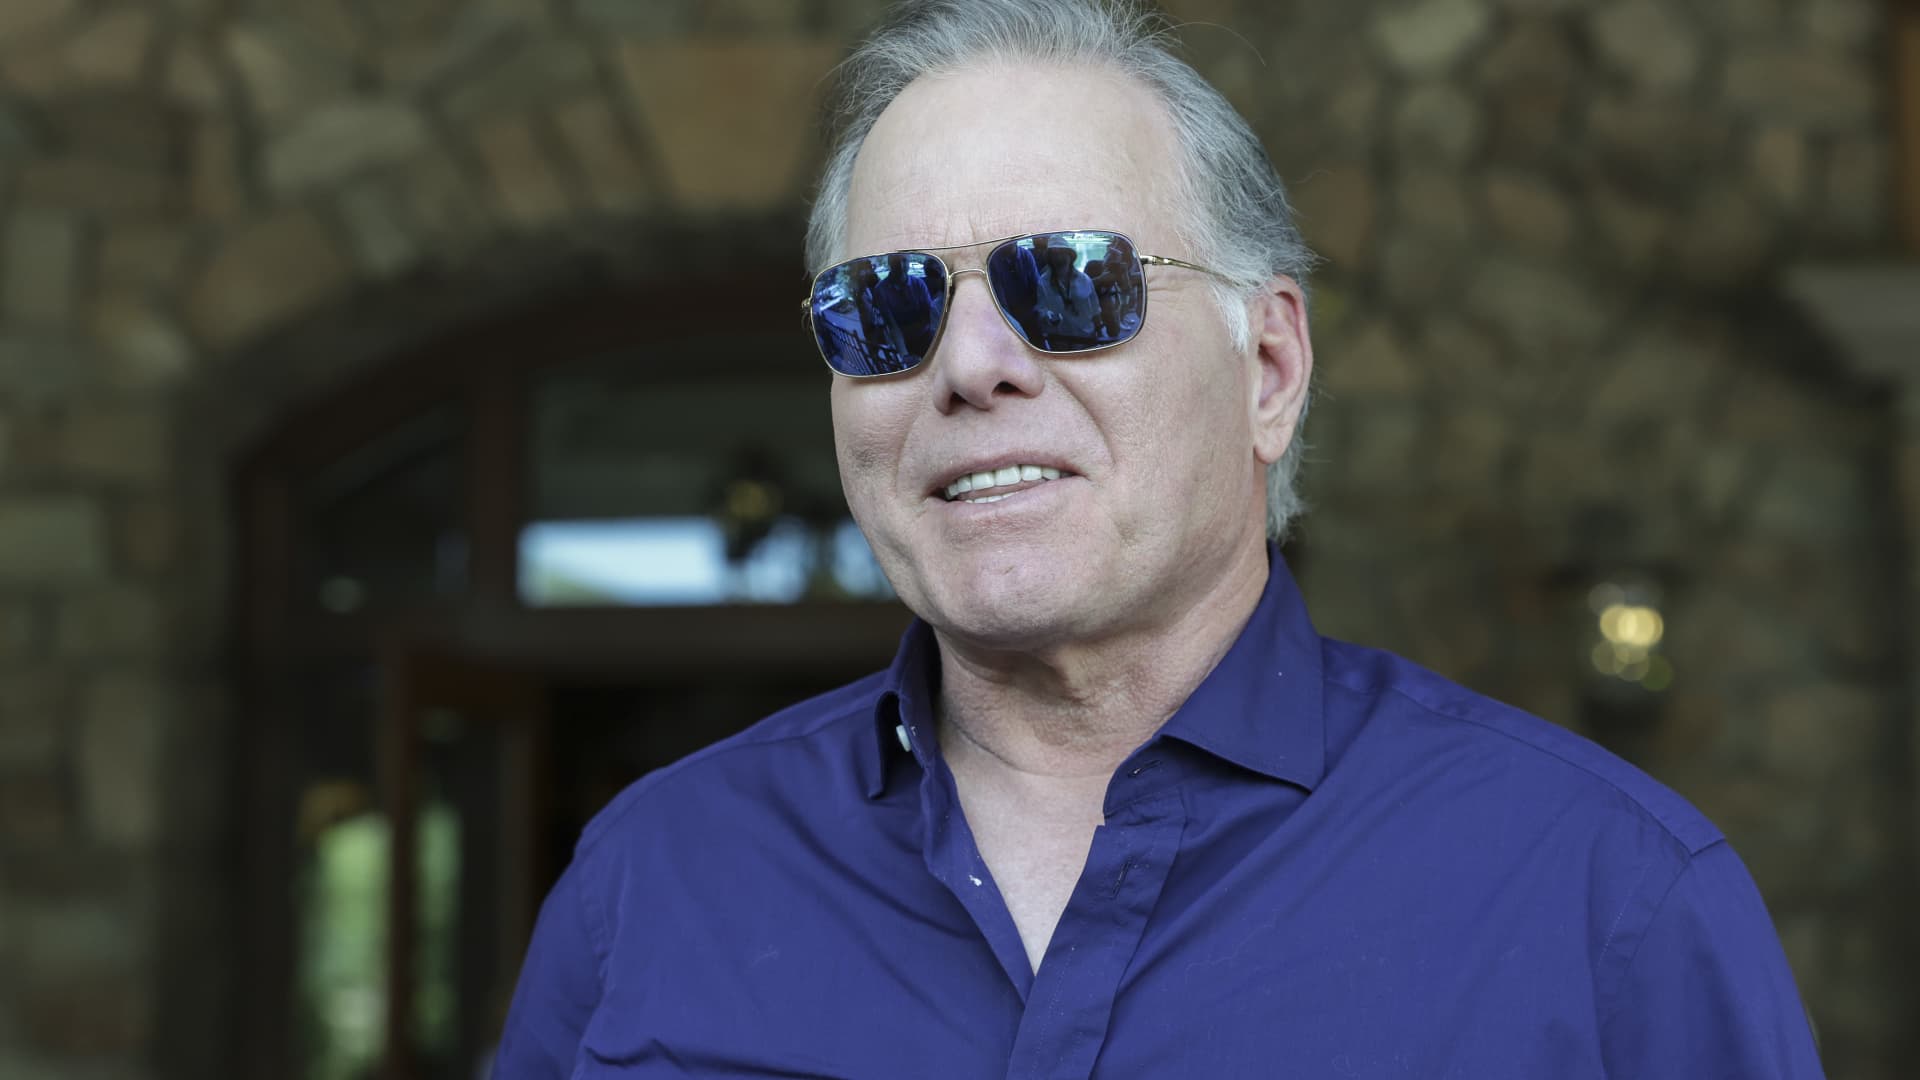 Warner Bros. Discovery CEO David Zaslav embraces the past as he plans his company’s future